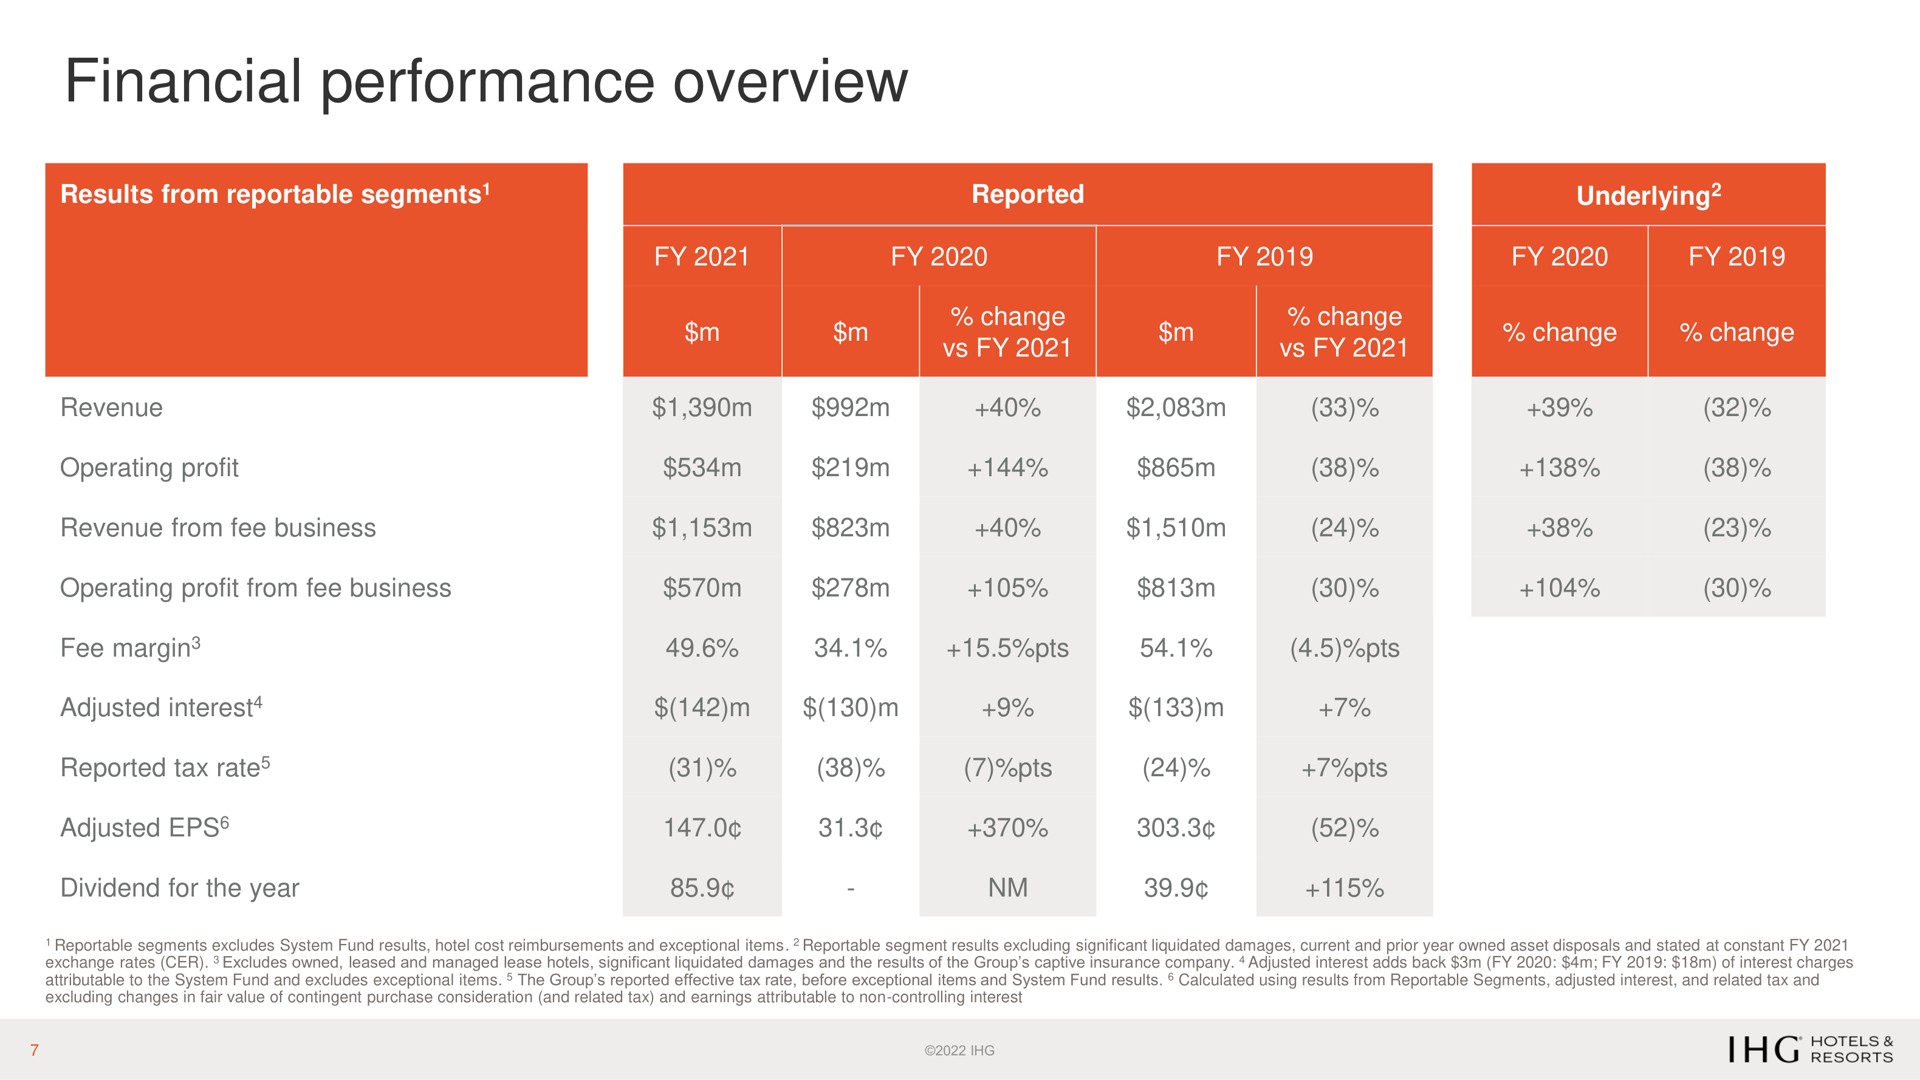 financial performance overview | IHG Hotels